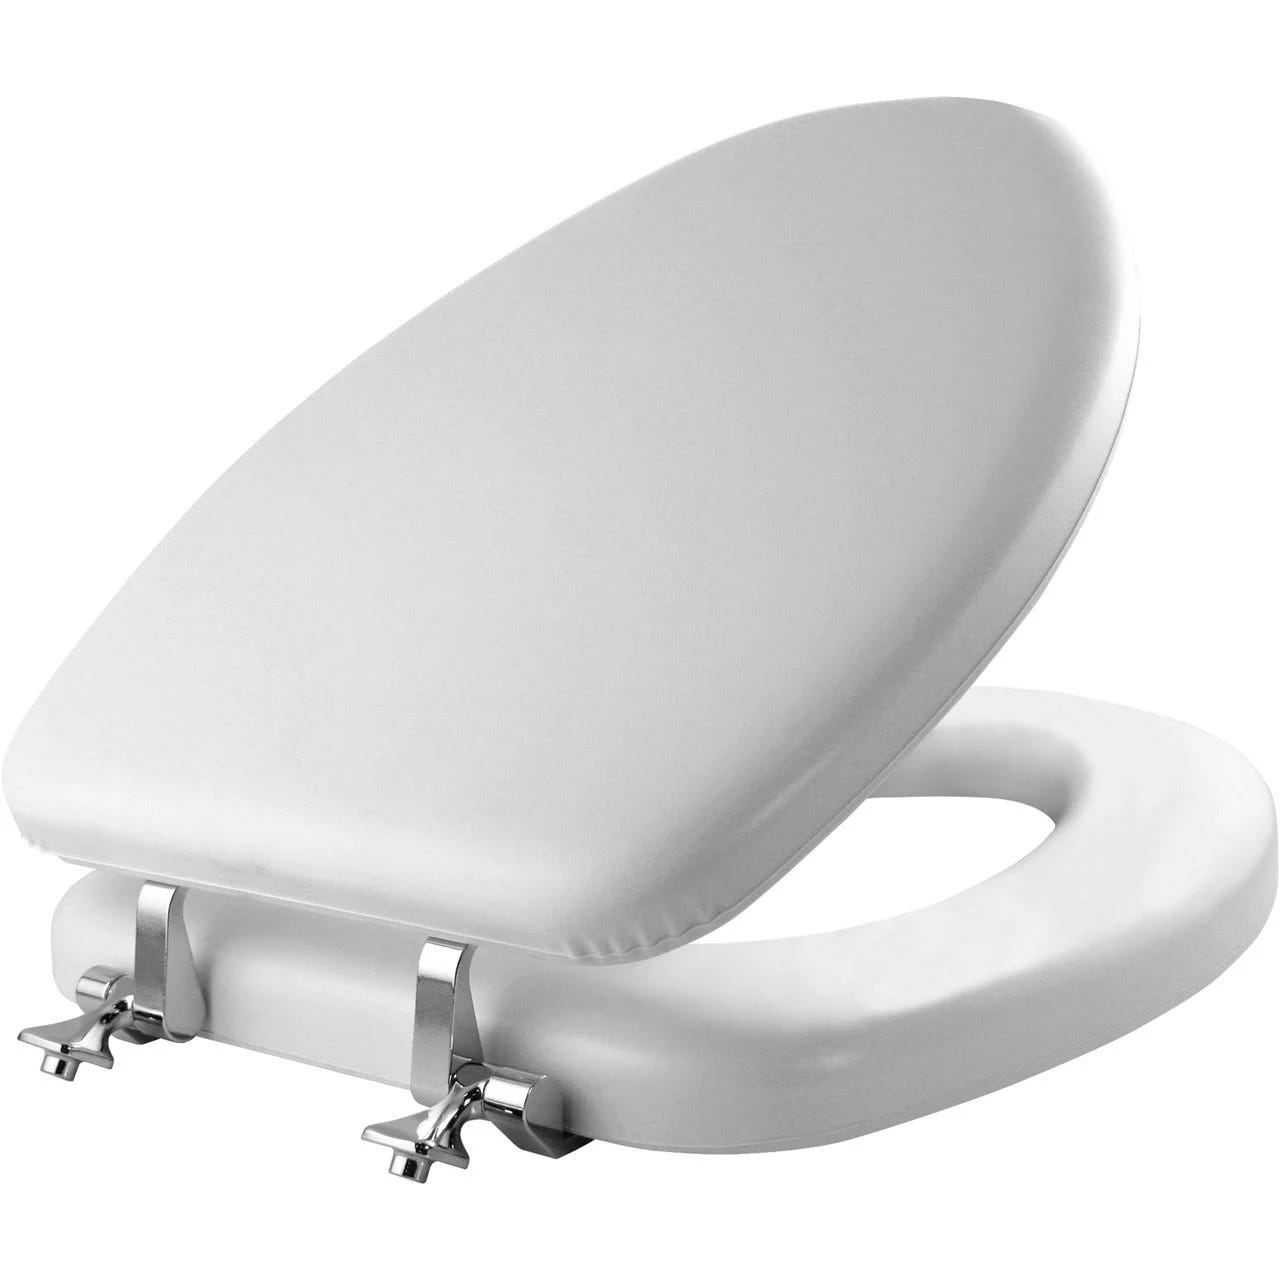 Mayfair Elongated Soft Toilet Seat with Premium Chrome Hinges | Image